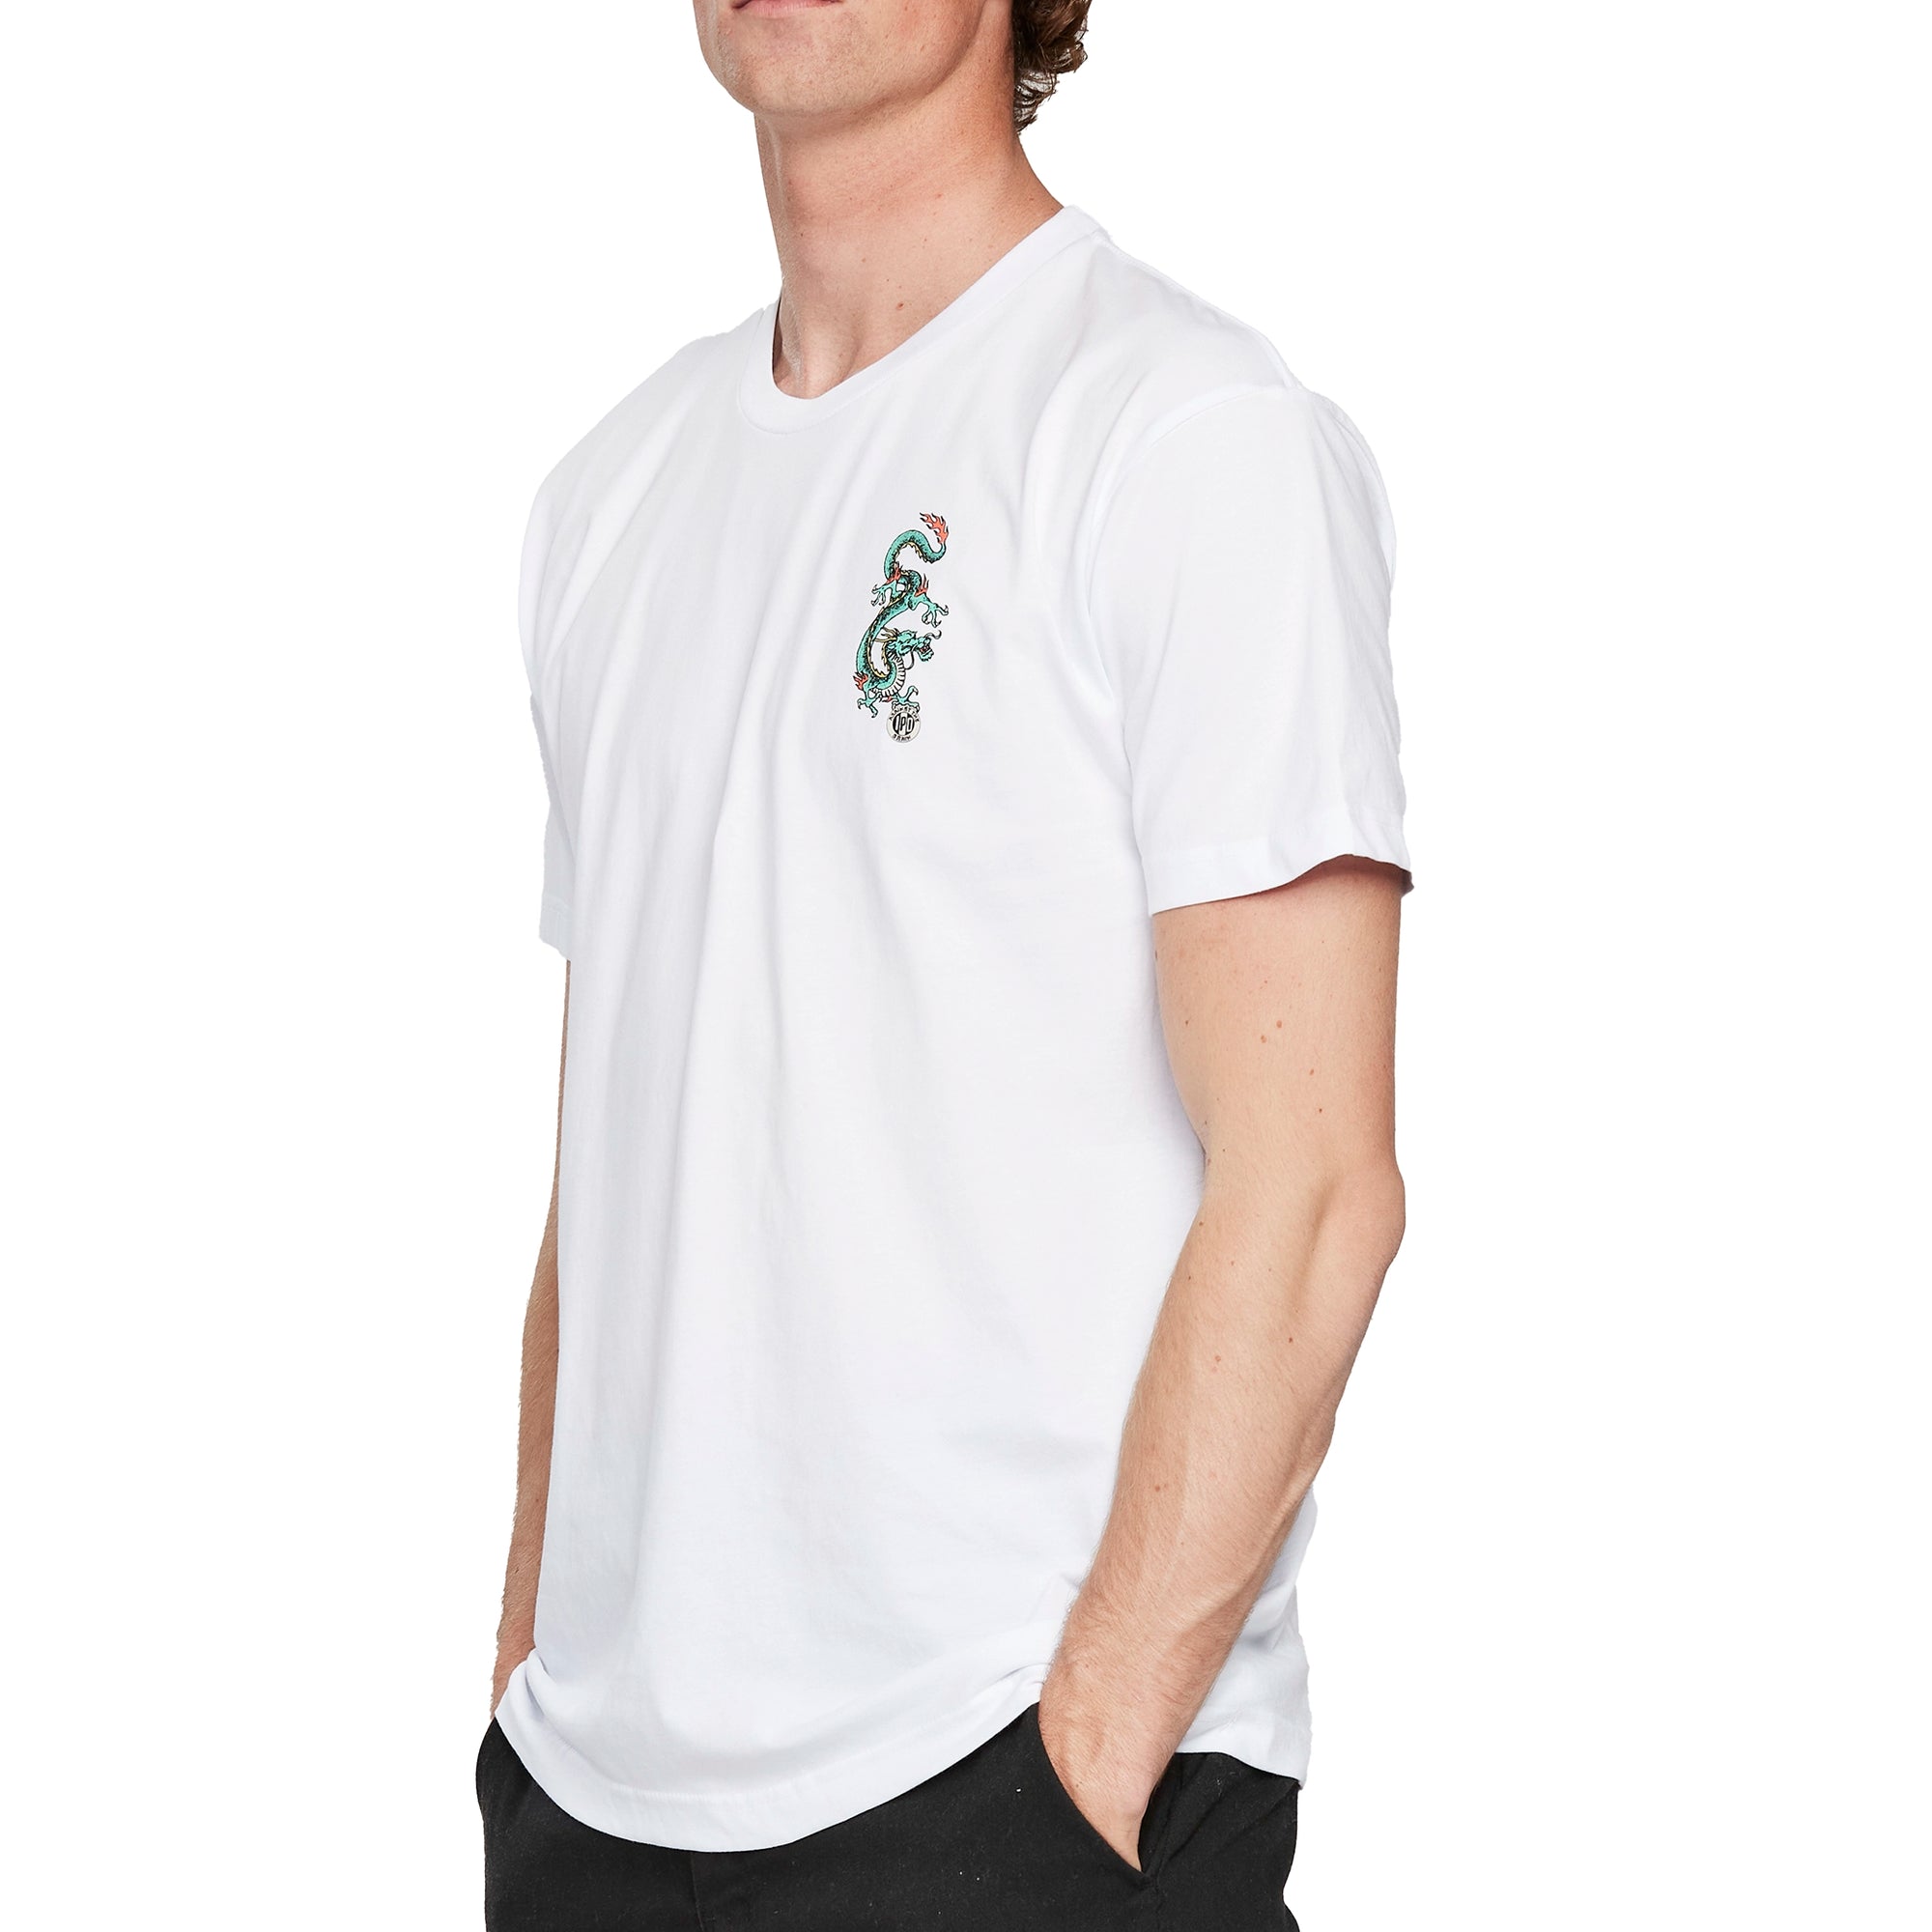 Back view of a white short sleeve tee with a large I P D logo with the words Against the arching above, the word Grain arching below, and two green dragons on each side of the logo.